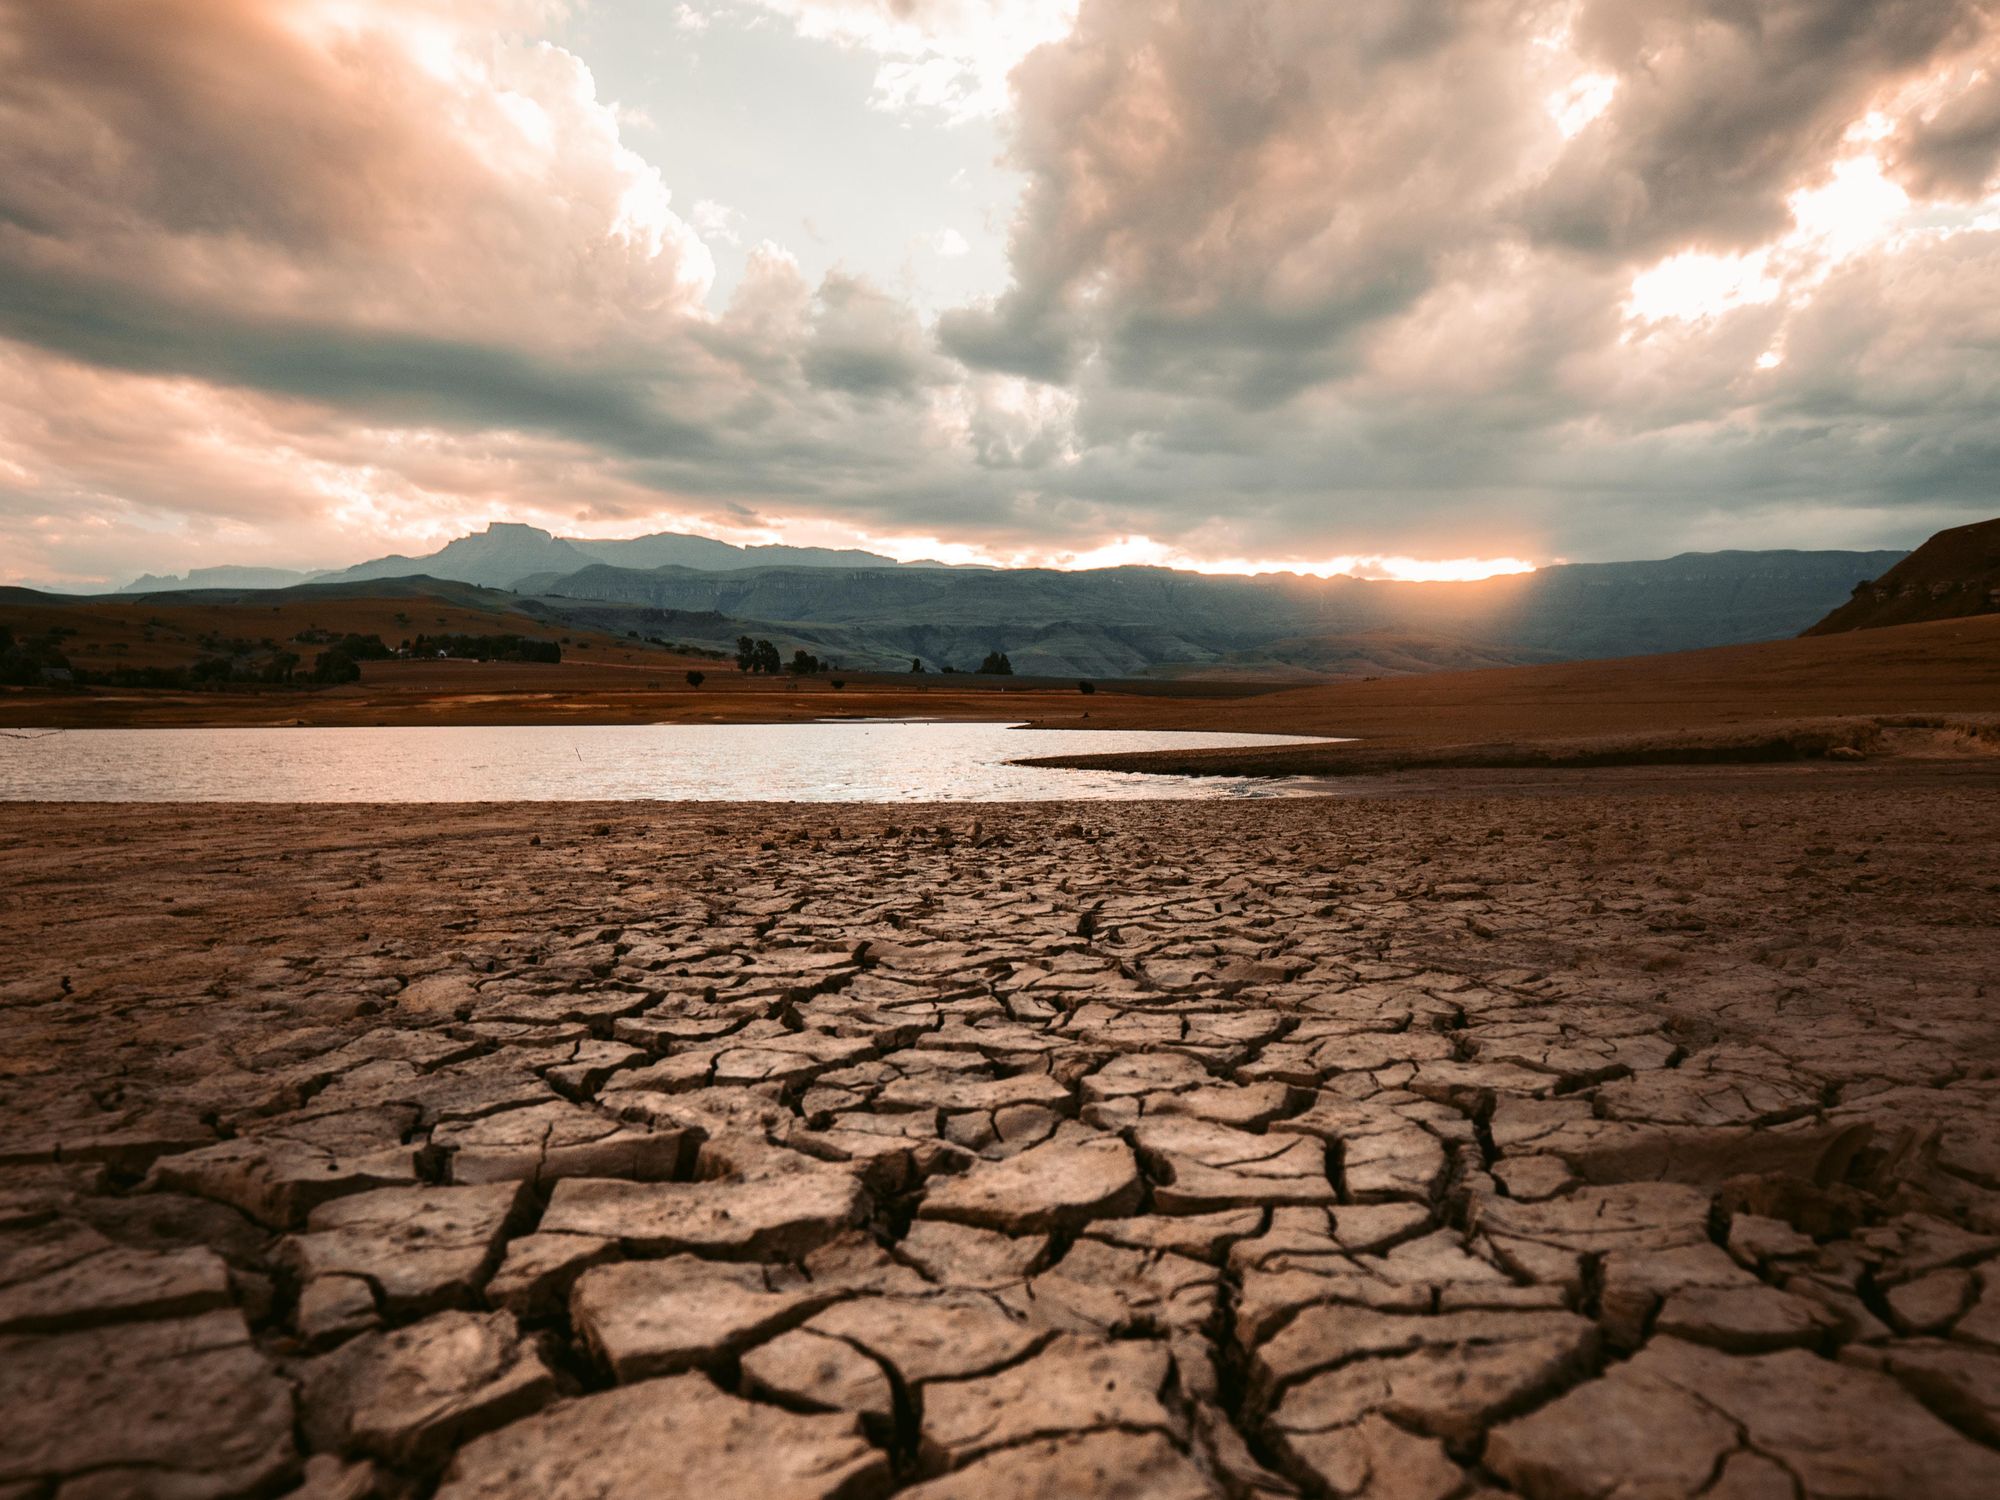 Six Technologies That Could Help End California's Cycle of Drought